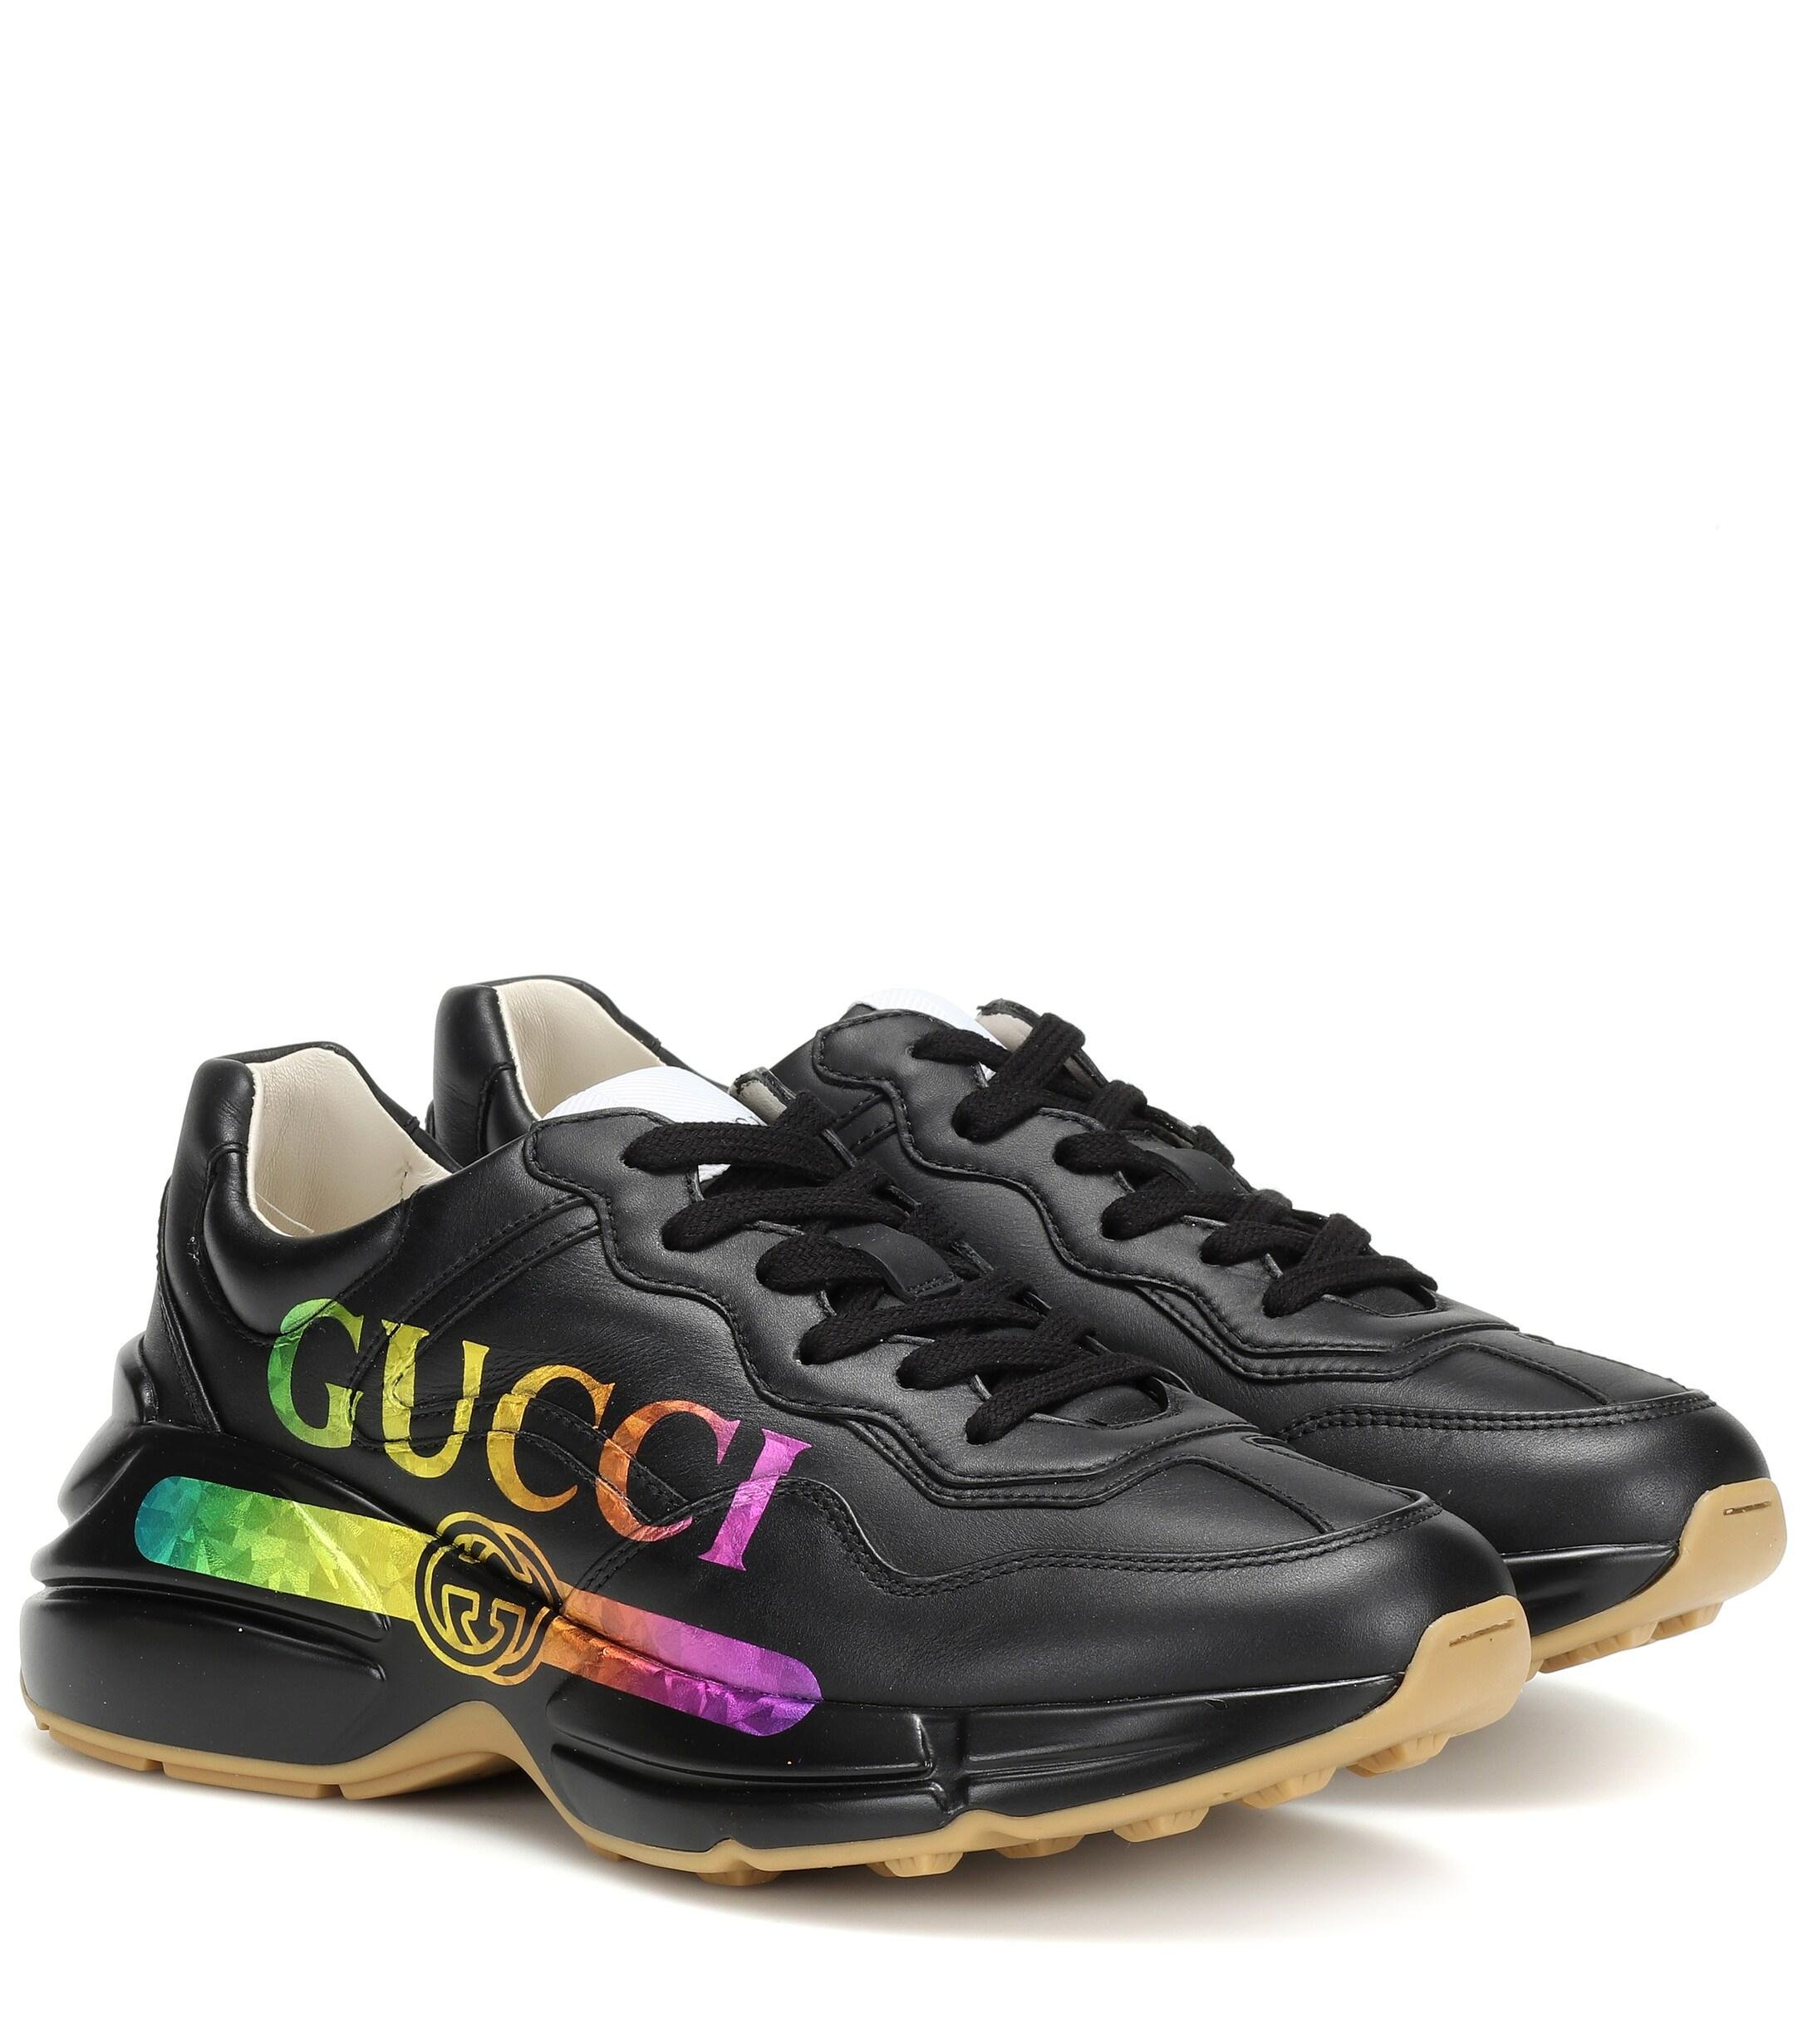 Gucci Rhyton Leather Sneakers in Black - Lyst